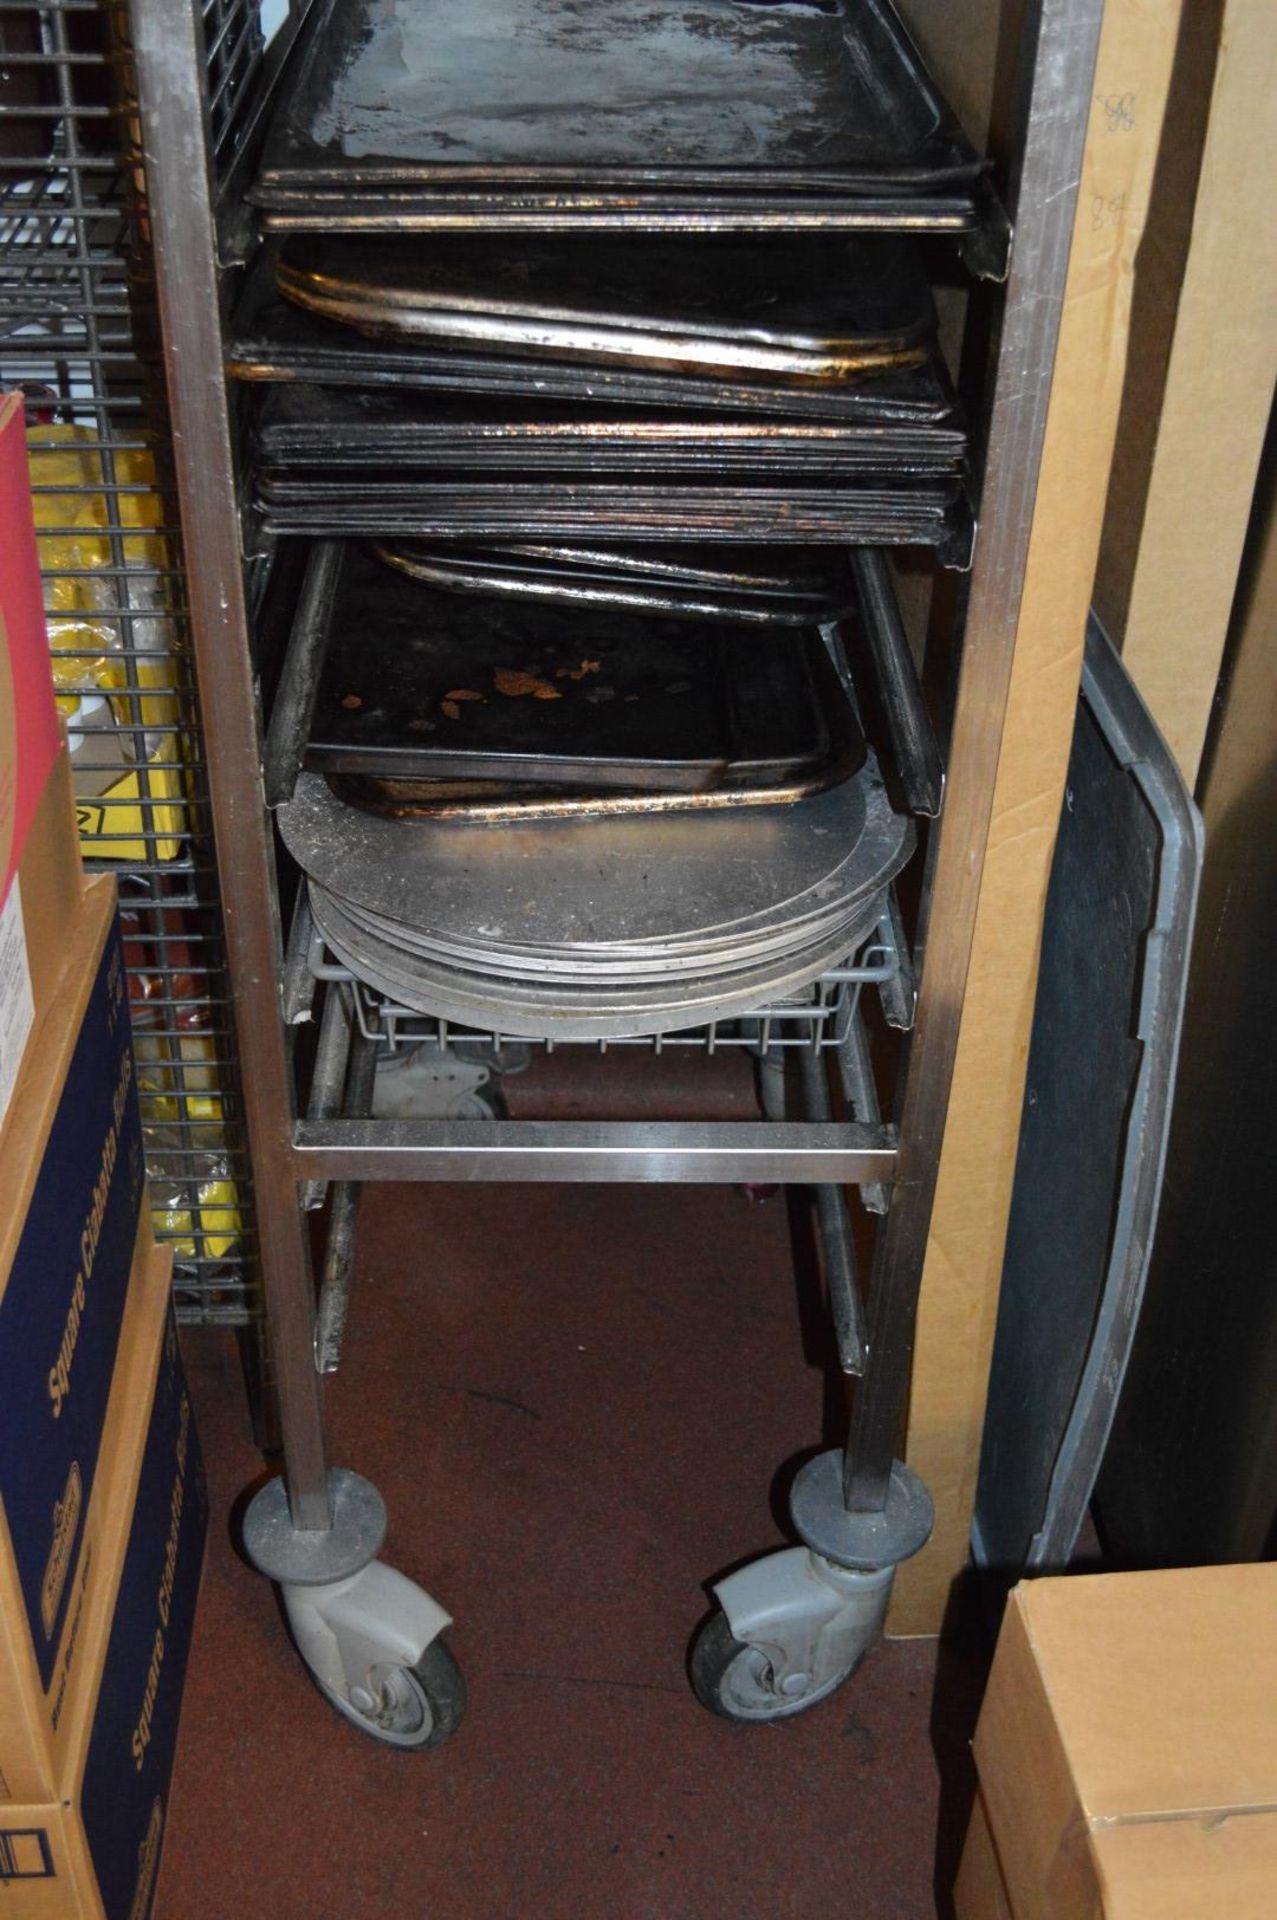 1 x Stainless Steel Upright 8 Tier Tray Trolly - Suitable For Restaurants / Cafes etc - CL357 - - Image 2 of 3